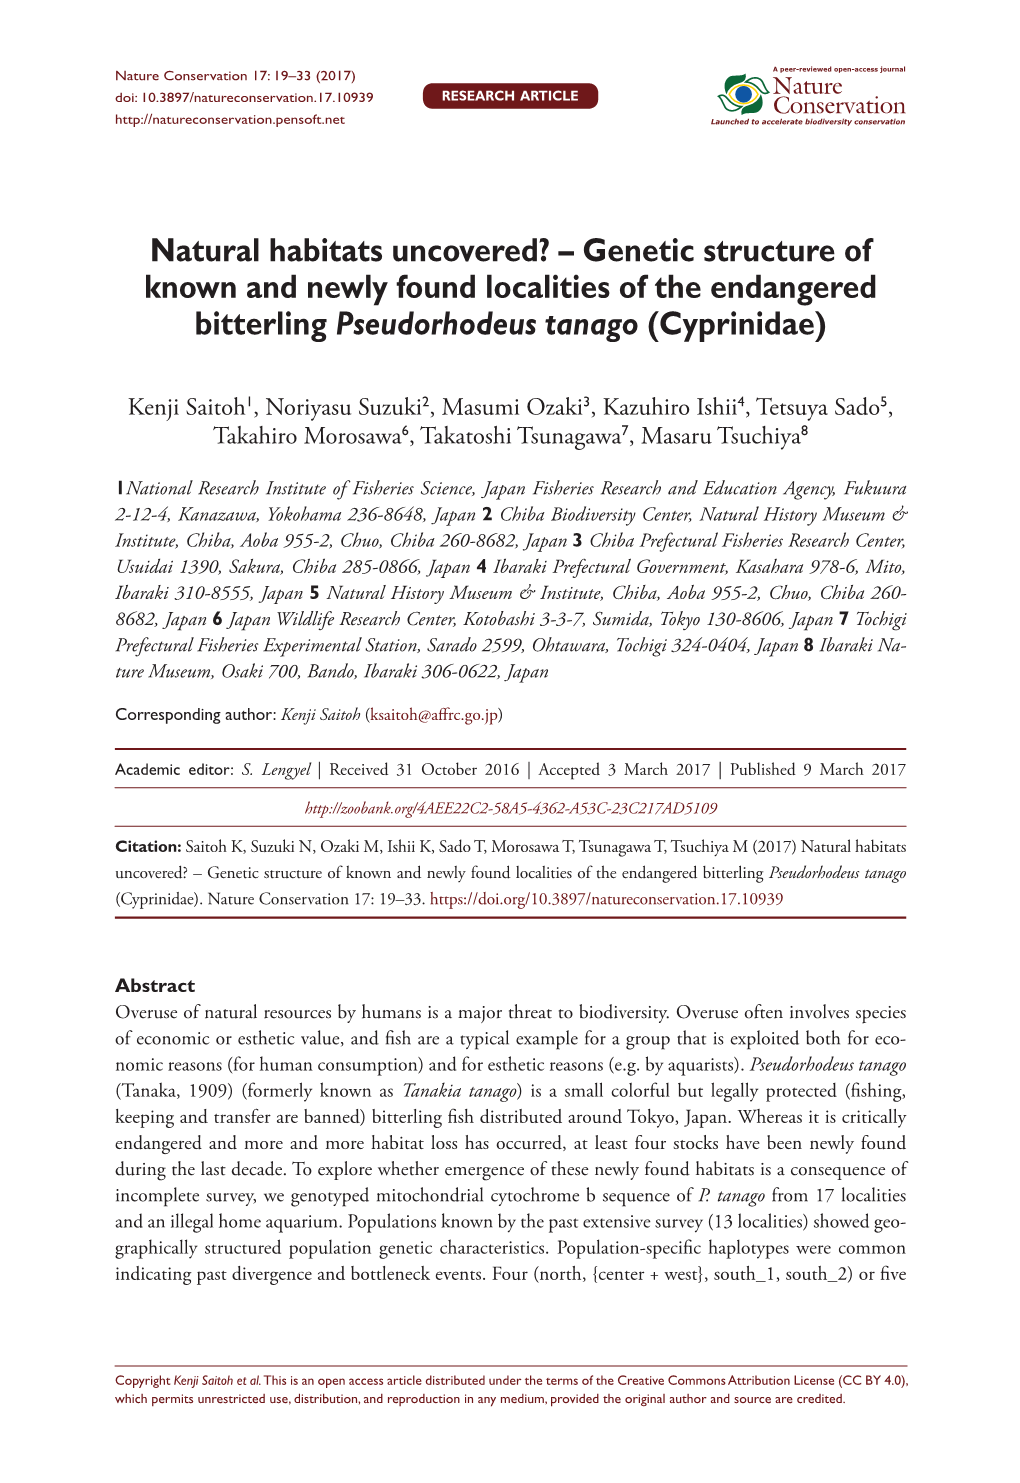 Natural Habitats Uncovered? – Genetic Structure of Known and Newly Found Localities of the Endangered Bitterling Pseudorhodeus Tanago (Cyprinidae)